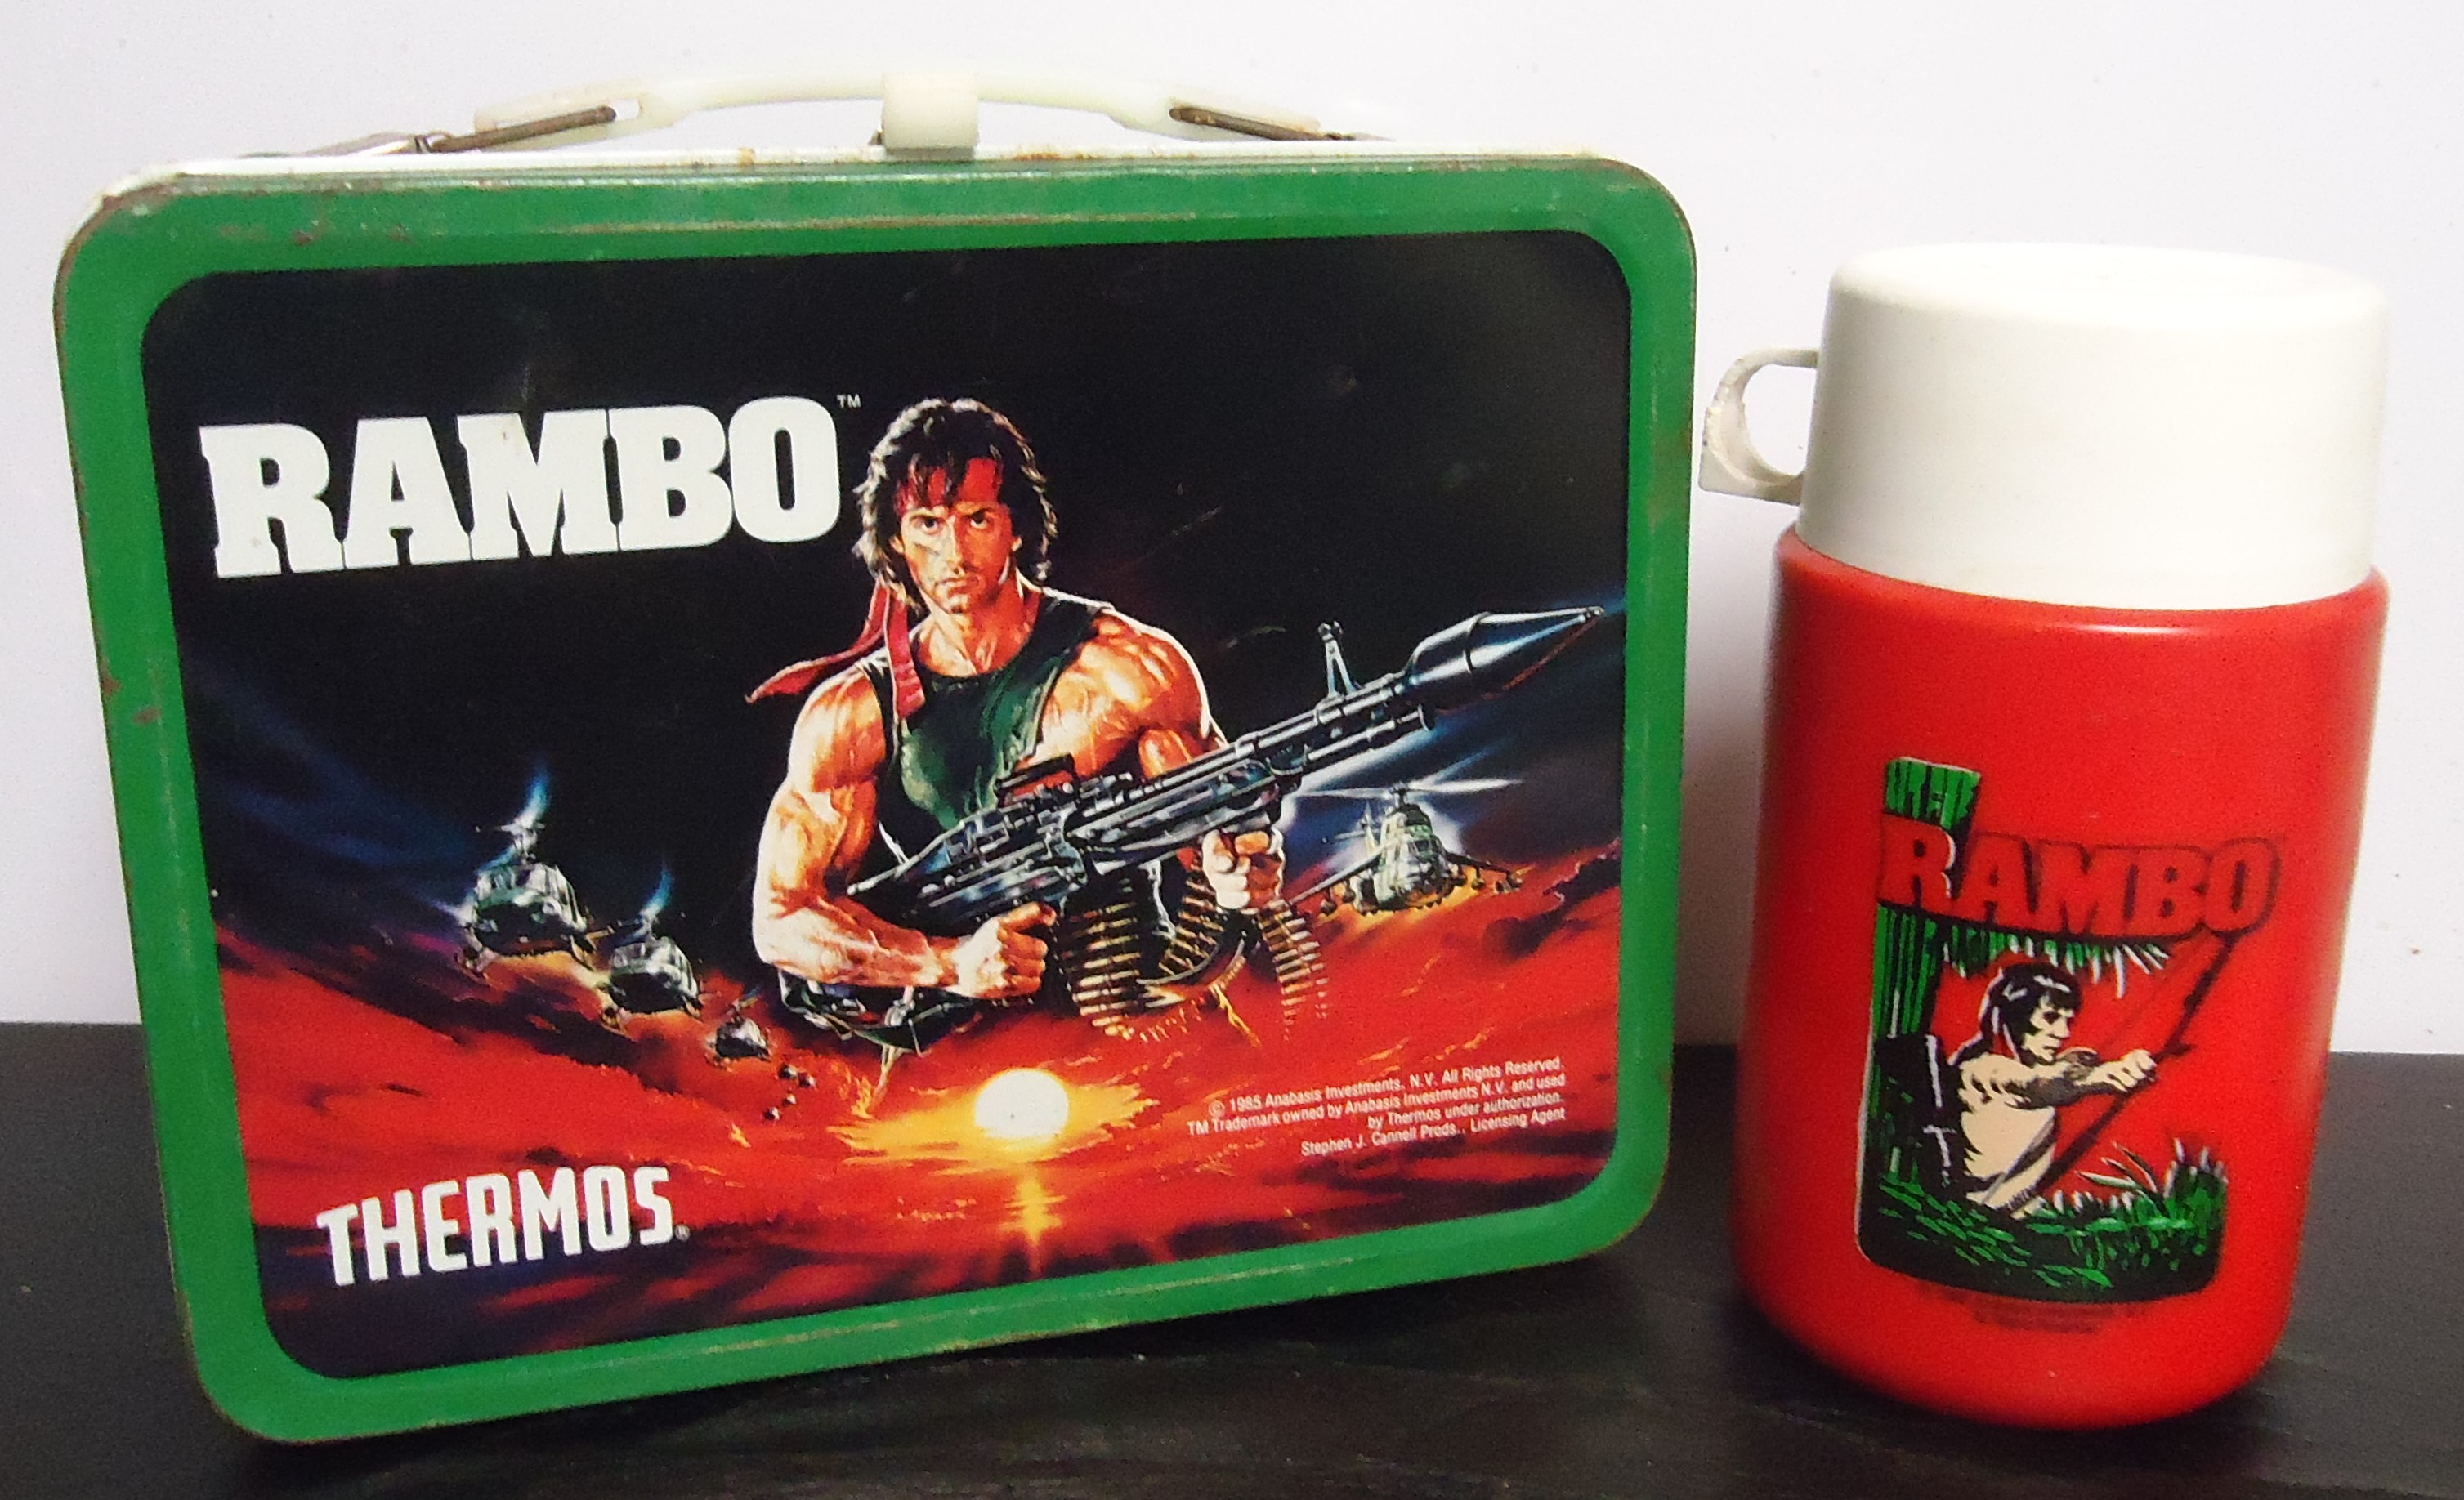 (15) "Rambo" Metal Lunch Box
W/ Thermos
$55.00